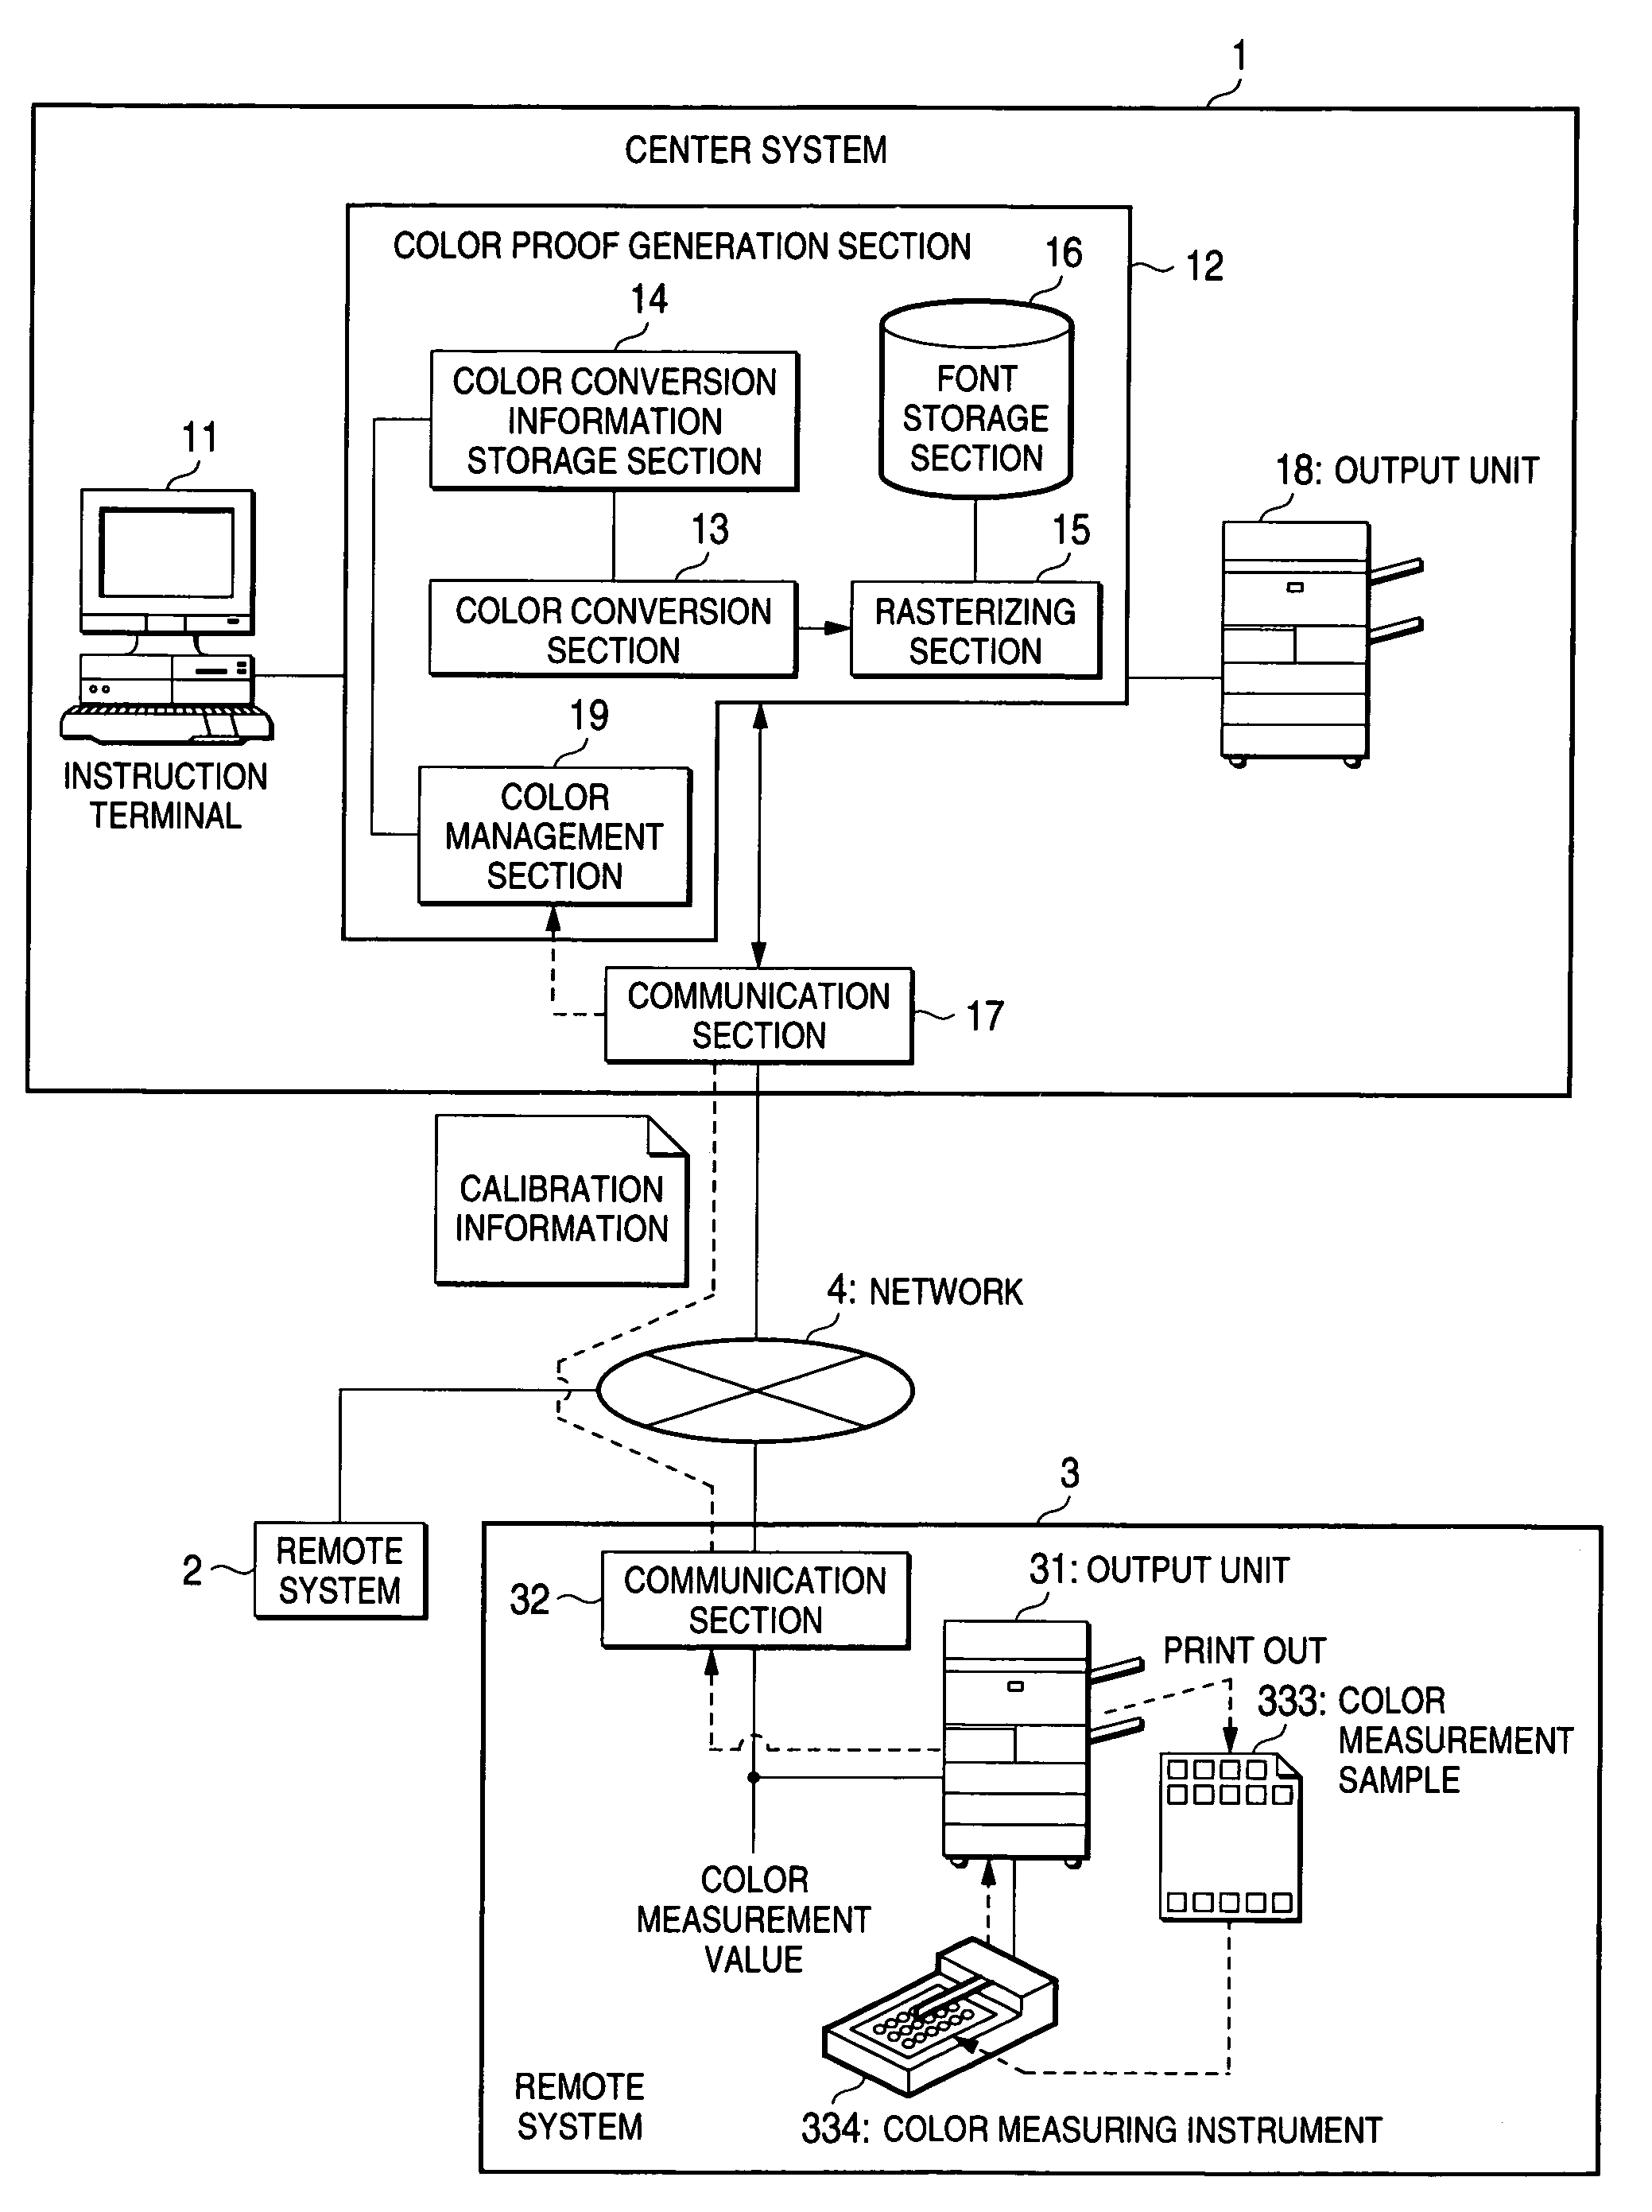 Color image processing apparatus and color image processing system using the apparatus